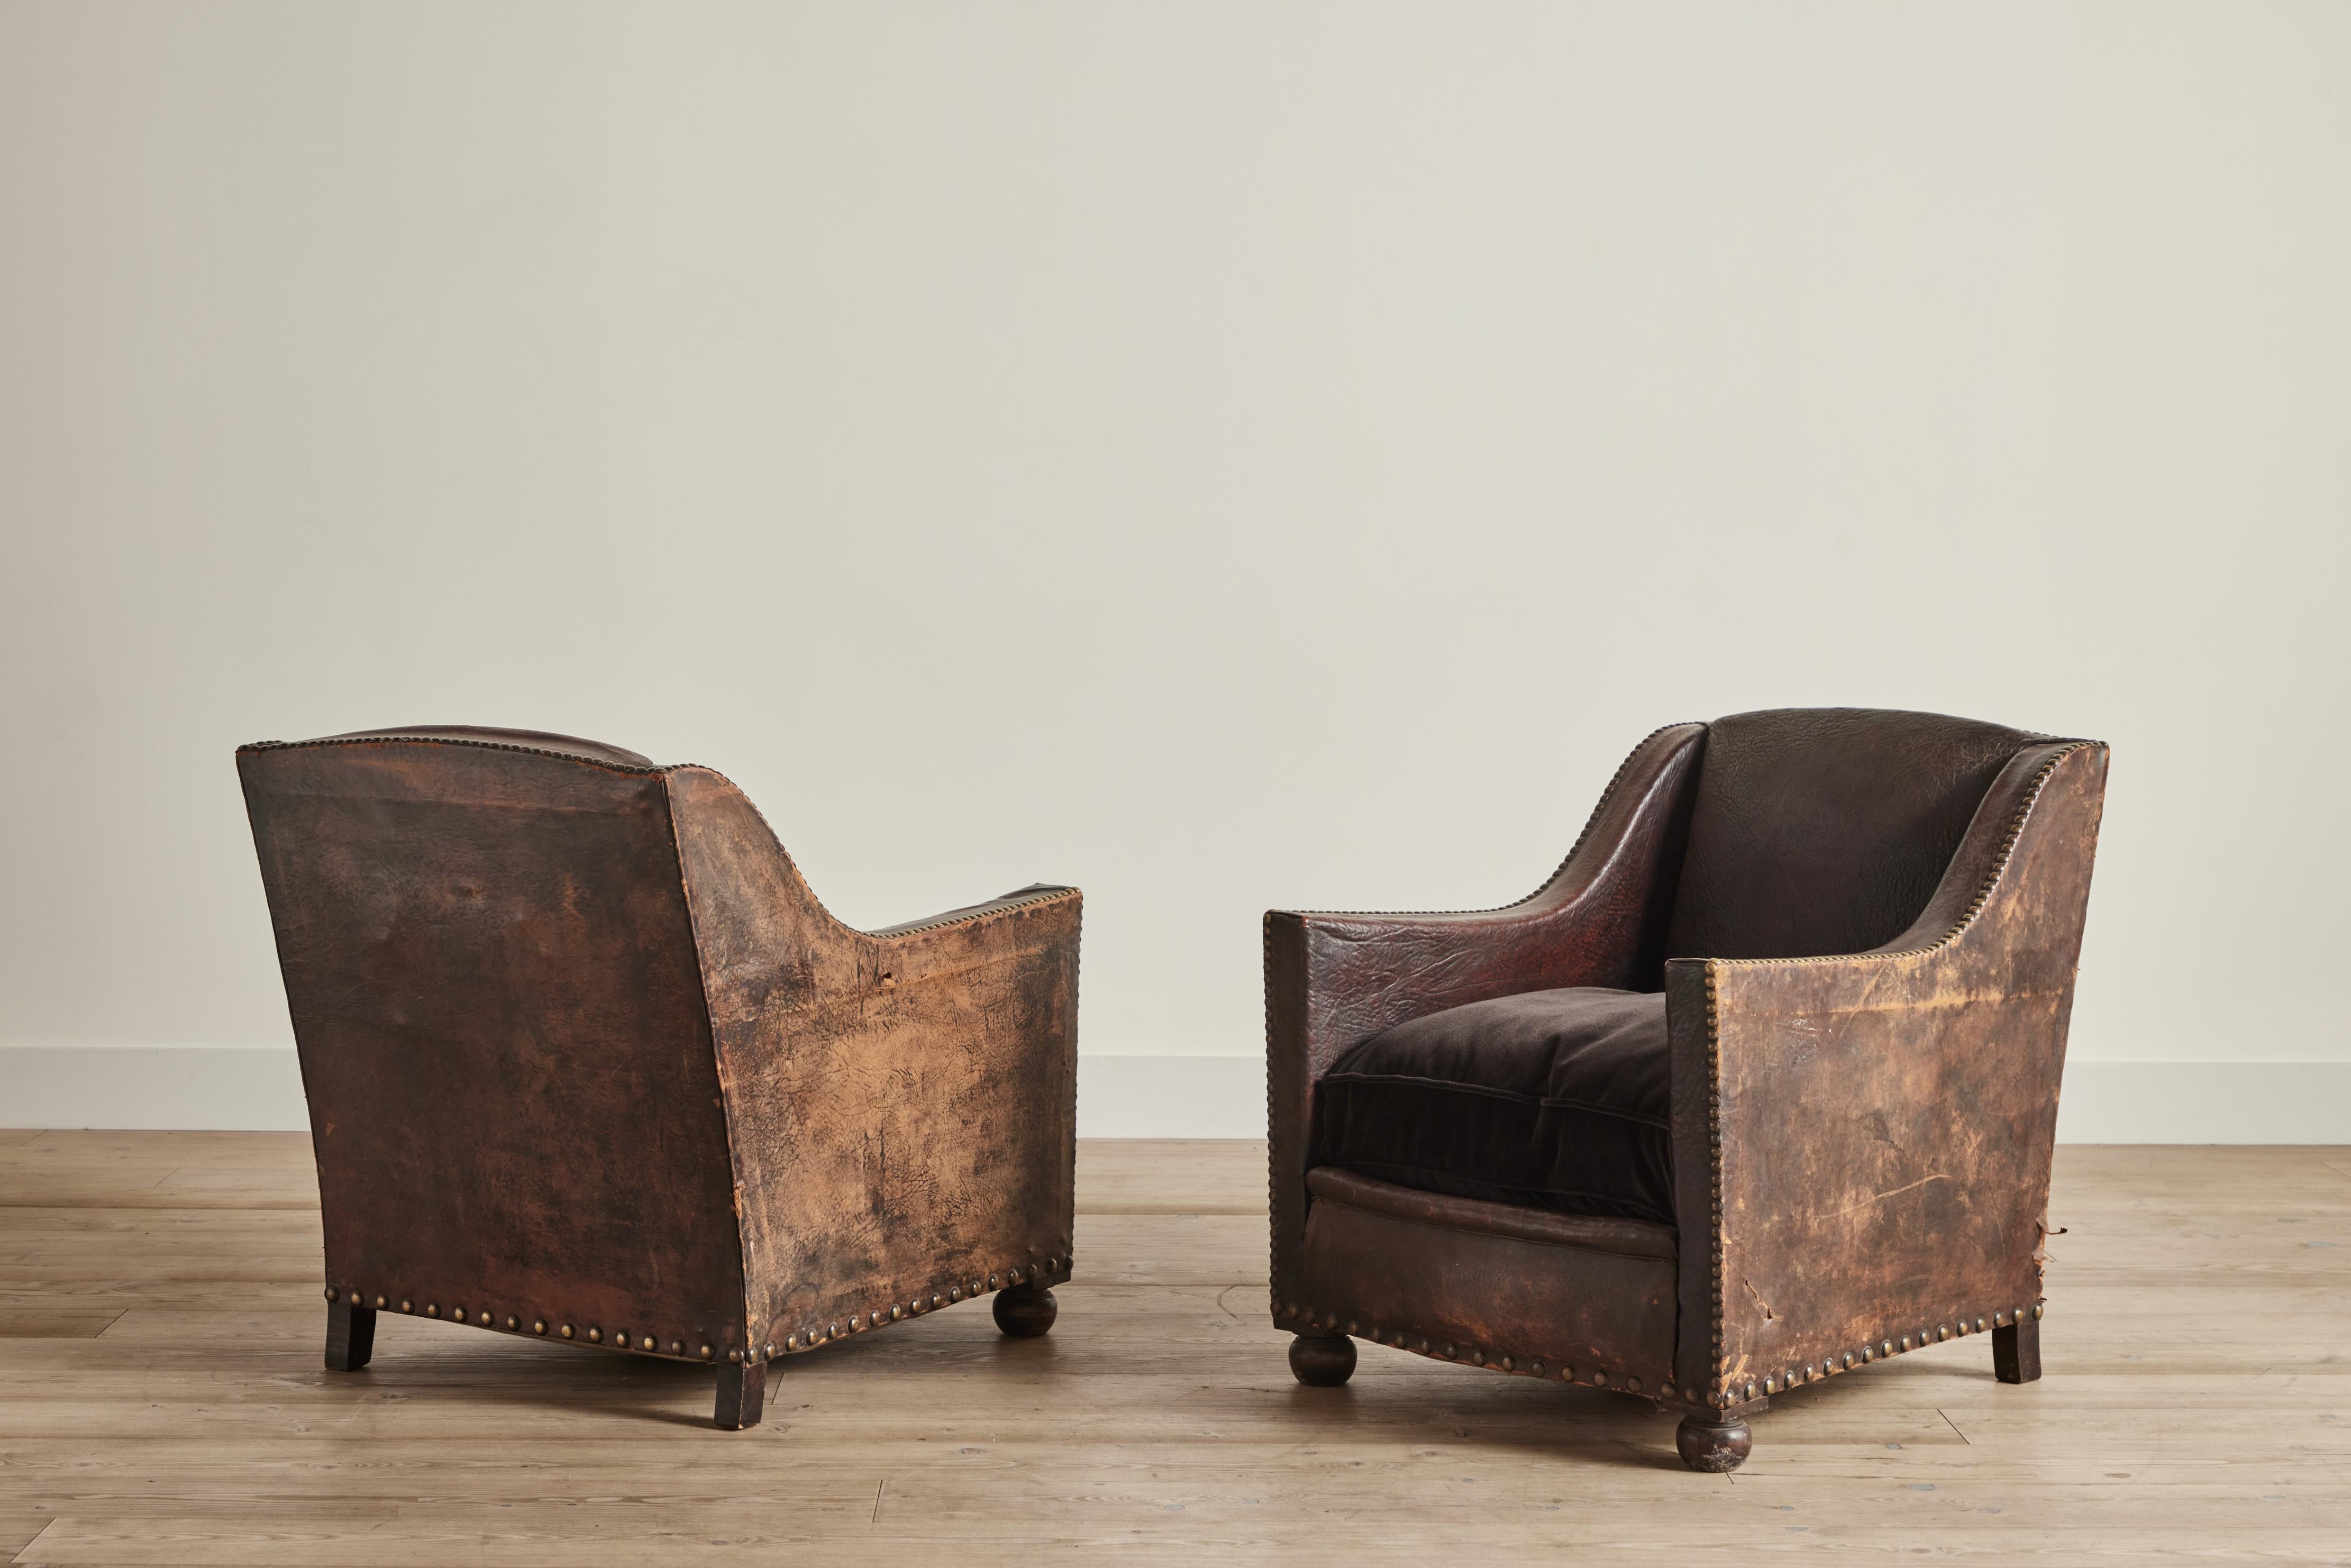 Stunning pair of early 20th century buffalo leather club chairs with brown velvet seat cushions. Chairs sit on wood bun feet and feature brass stud detailing. Visible wear throughout that is consistent with age and use. 